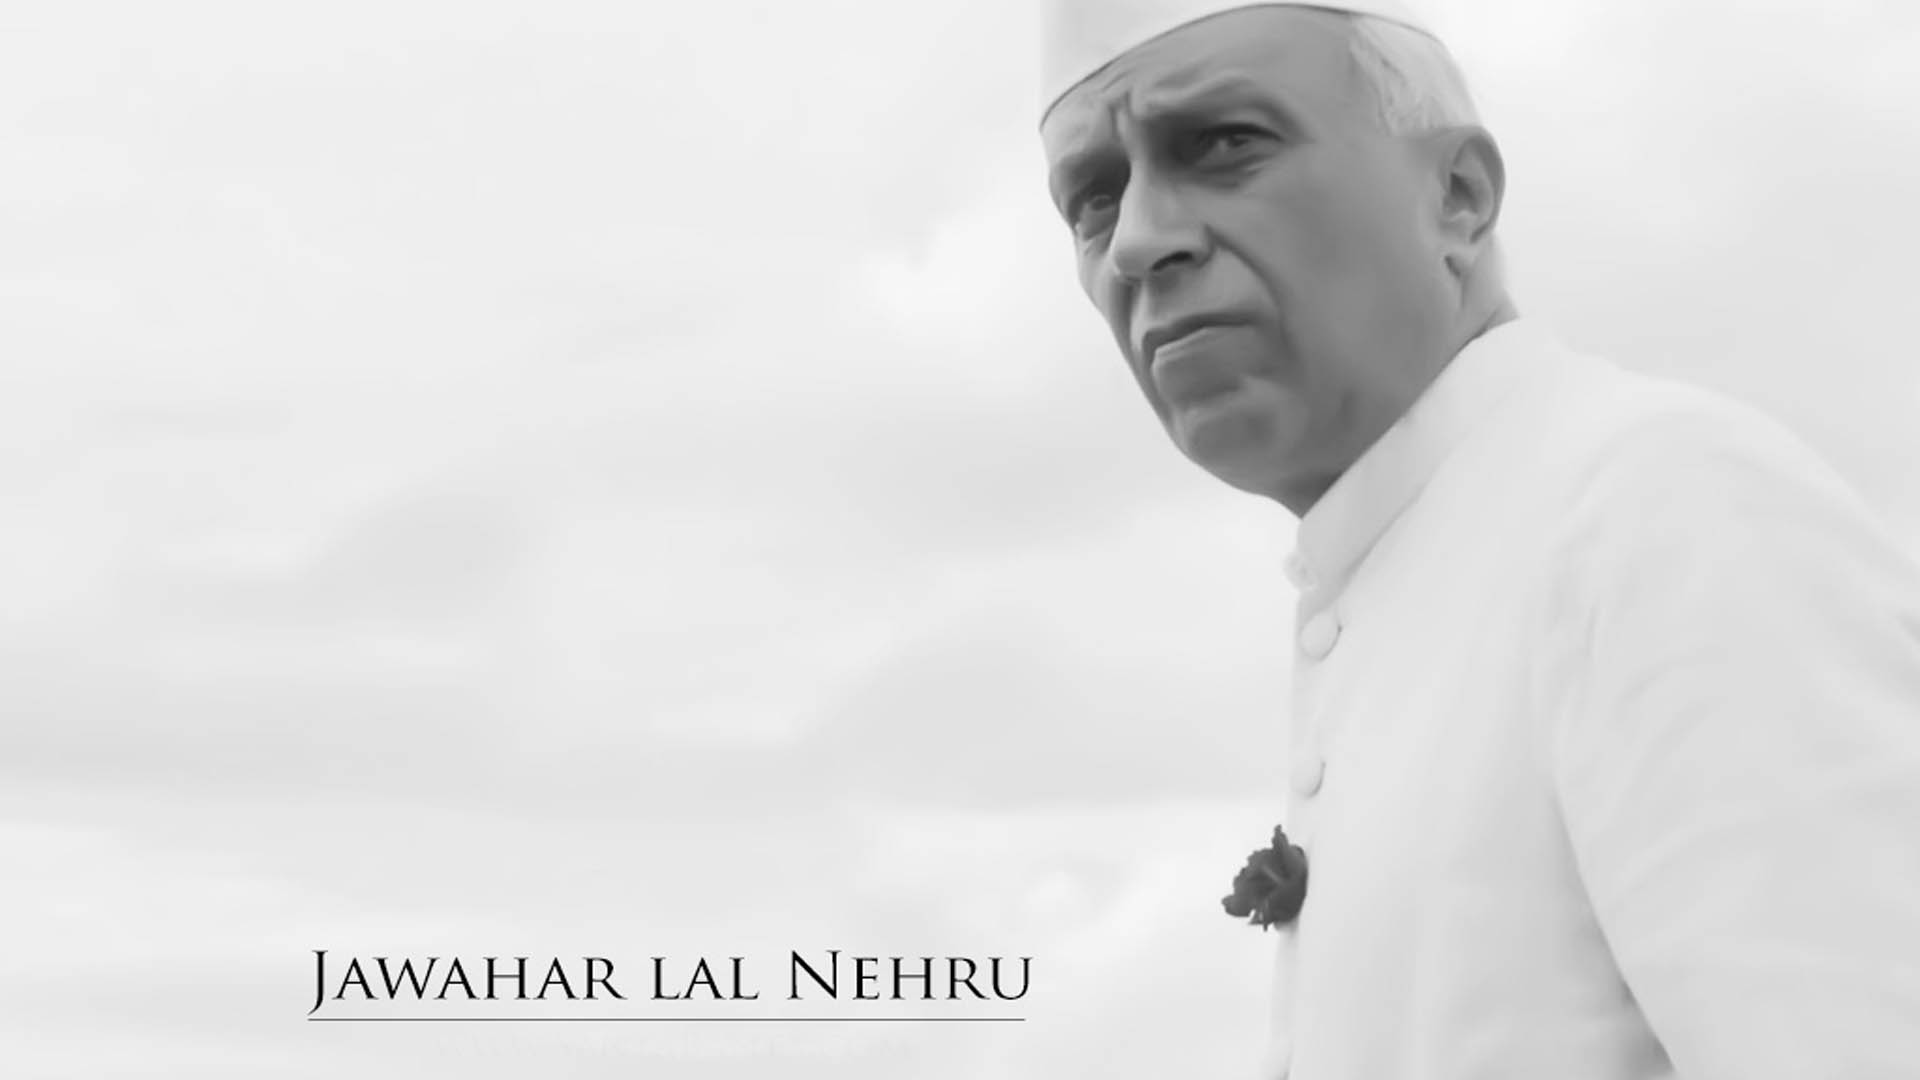 Relevance of Nehruvian Secularism in present day India